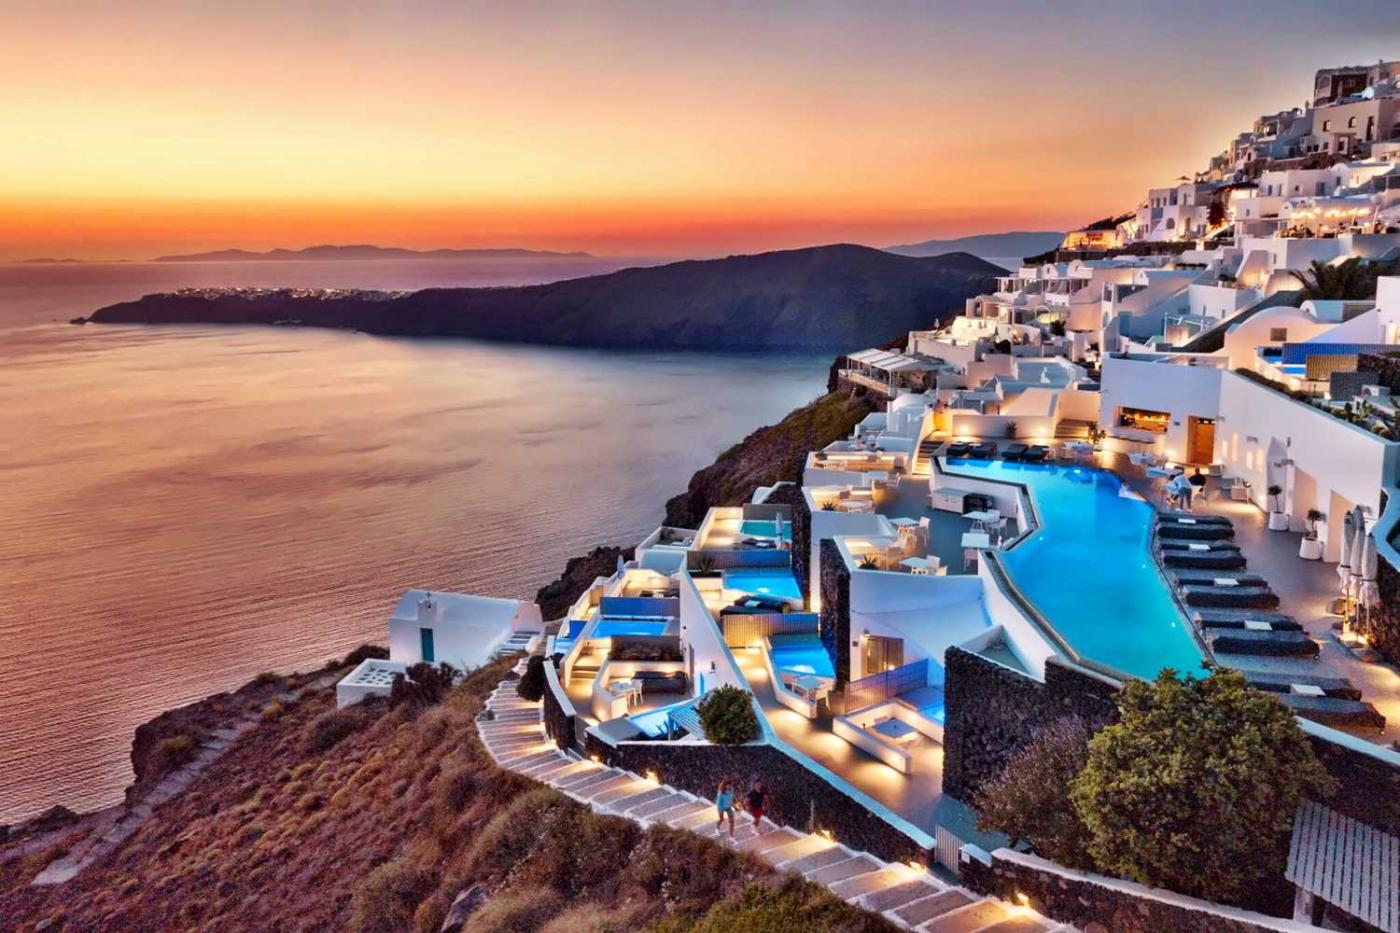 Hotel With a Sea View in Santorini